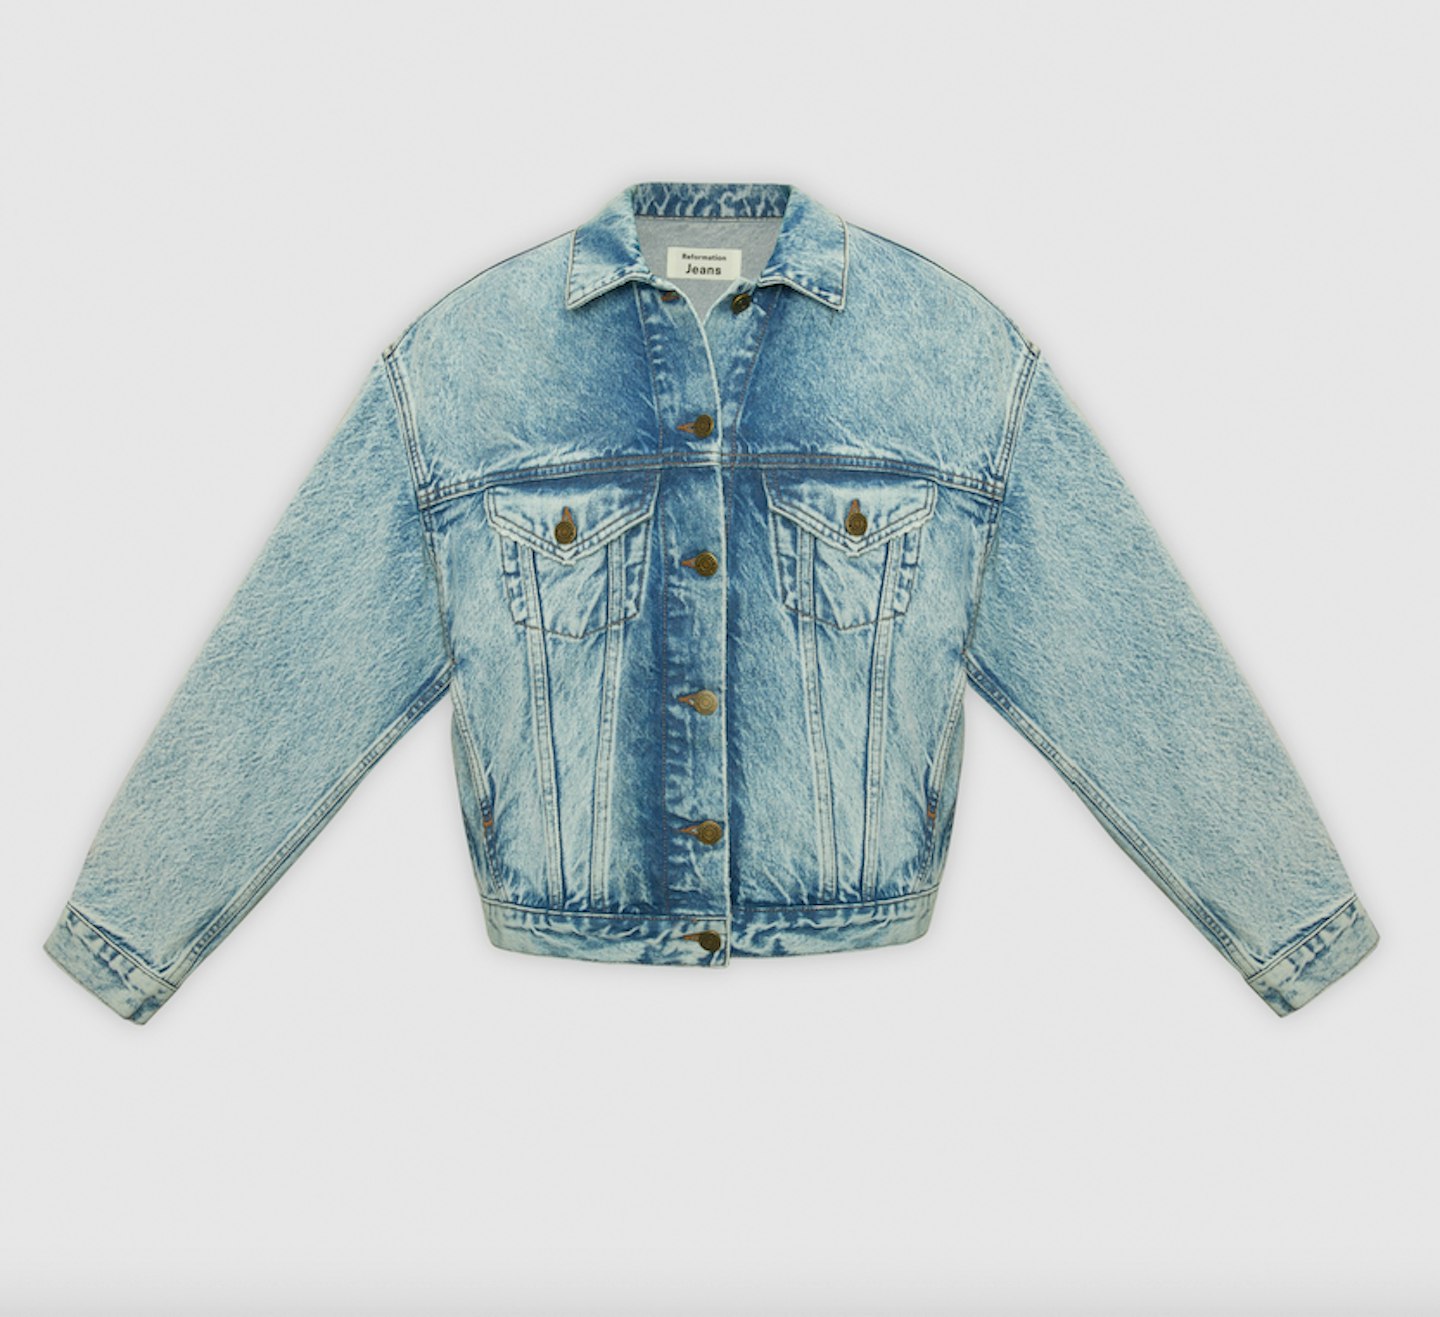 Reformation, Madison Relaxed Jean Jacket, £140